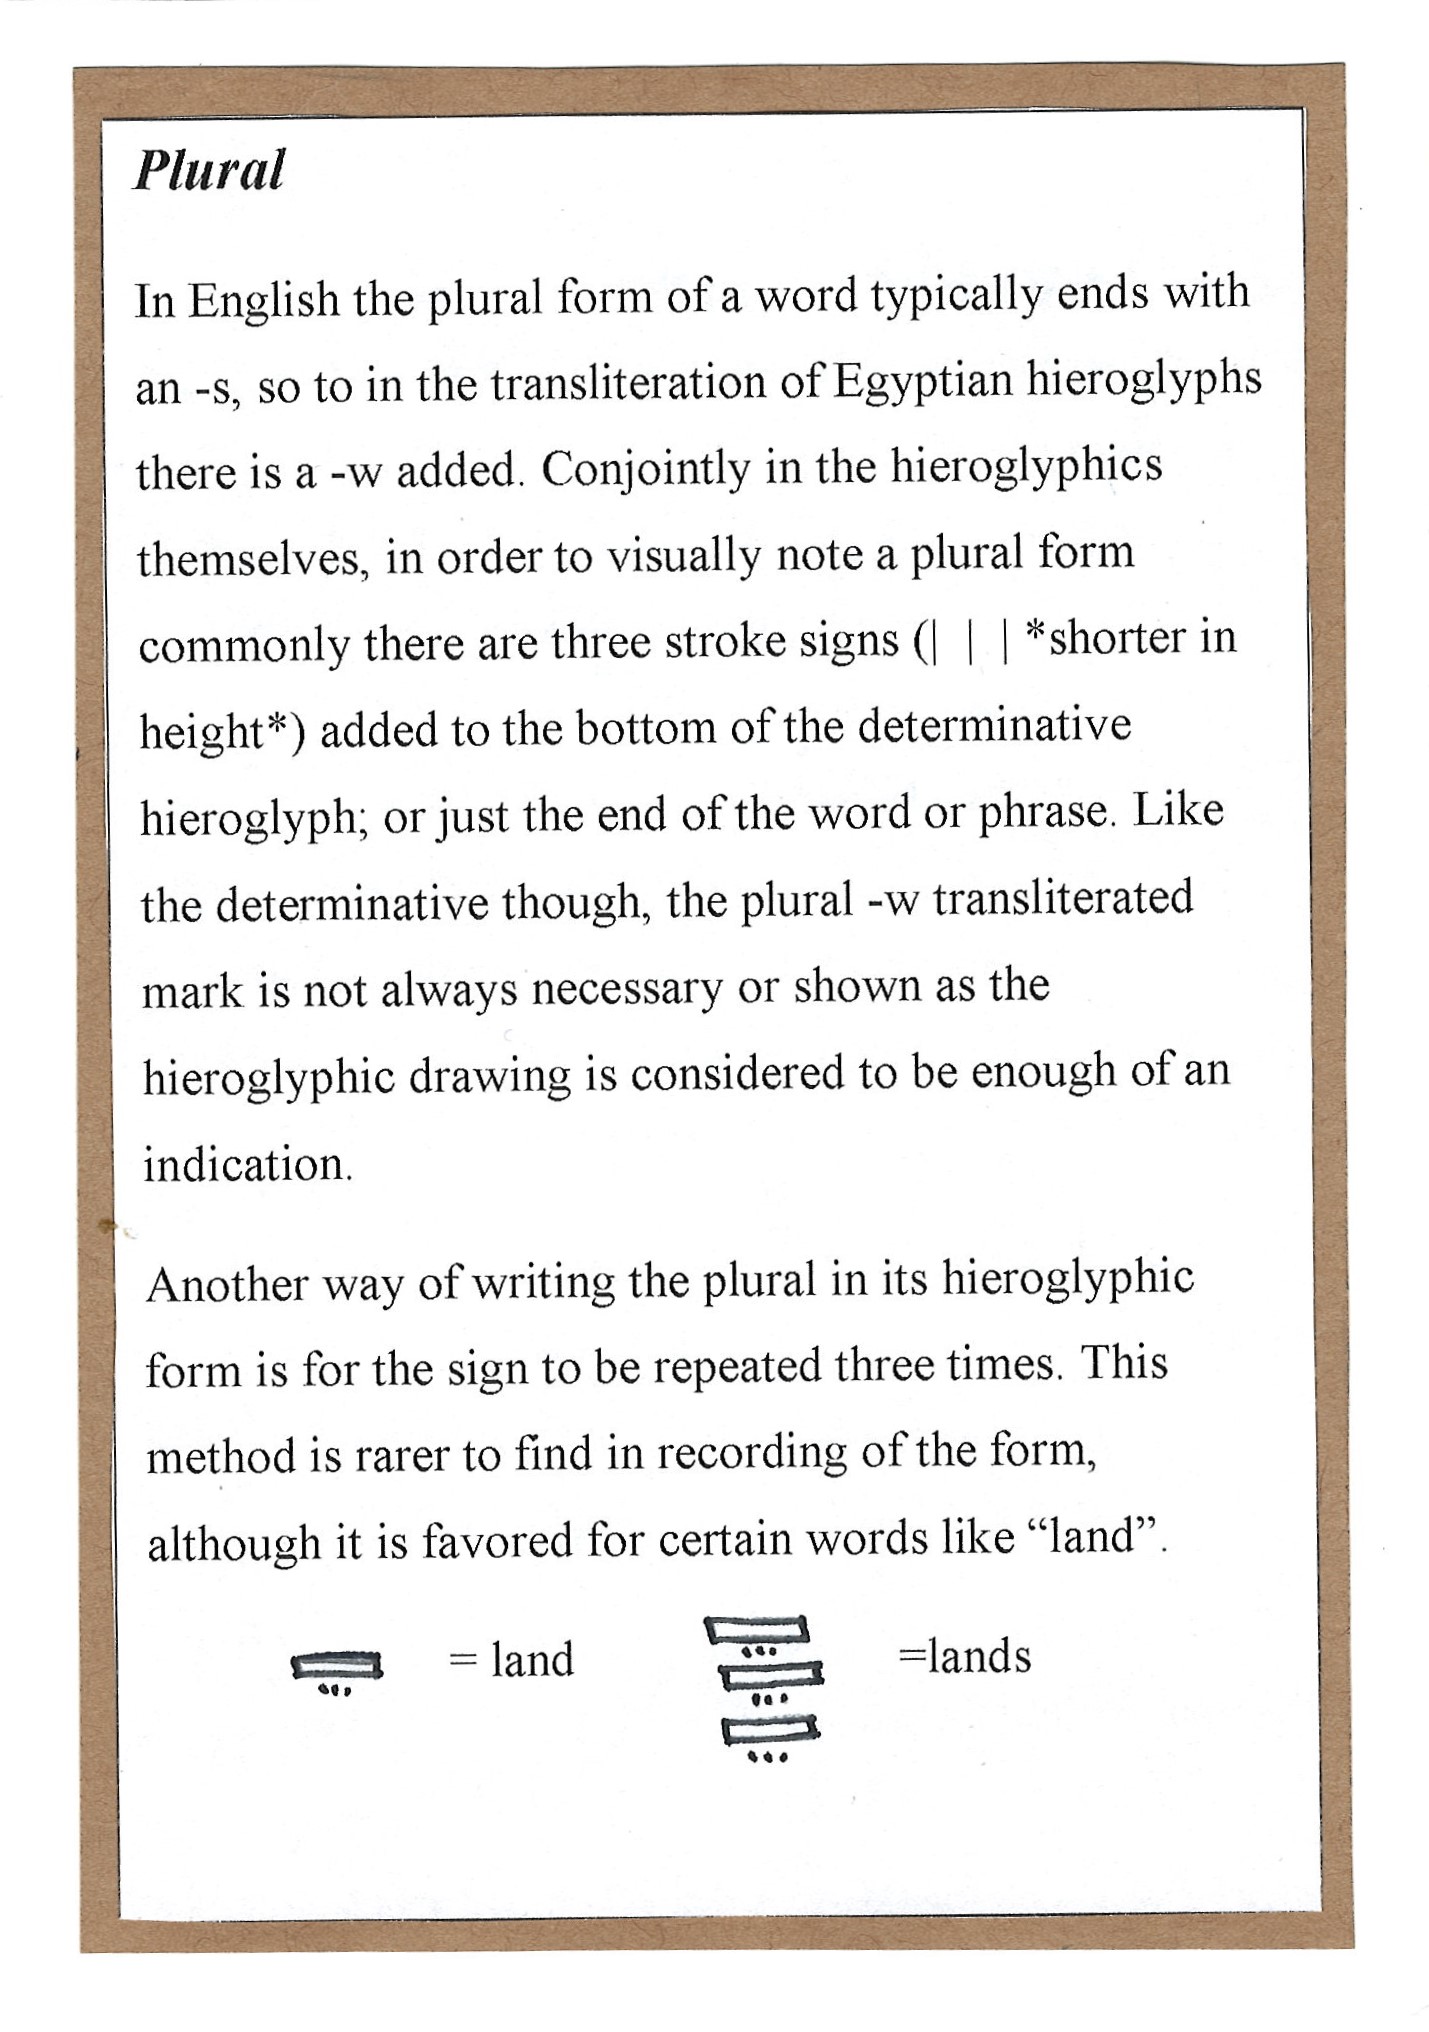 Page 12. Plural, and the different ways to accomplish the form in Egyptian hieroglyphs as opposed to the English language.